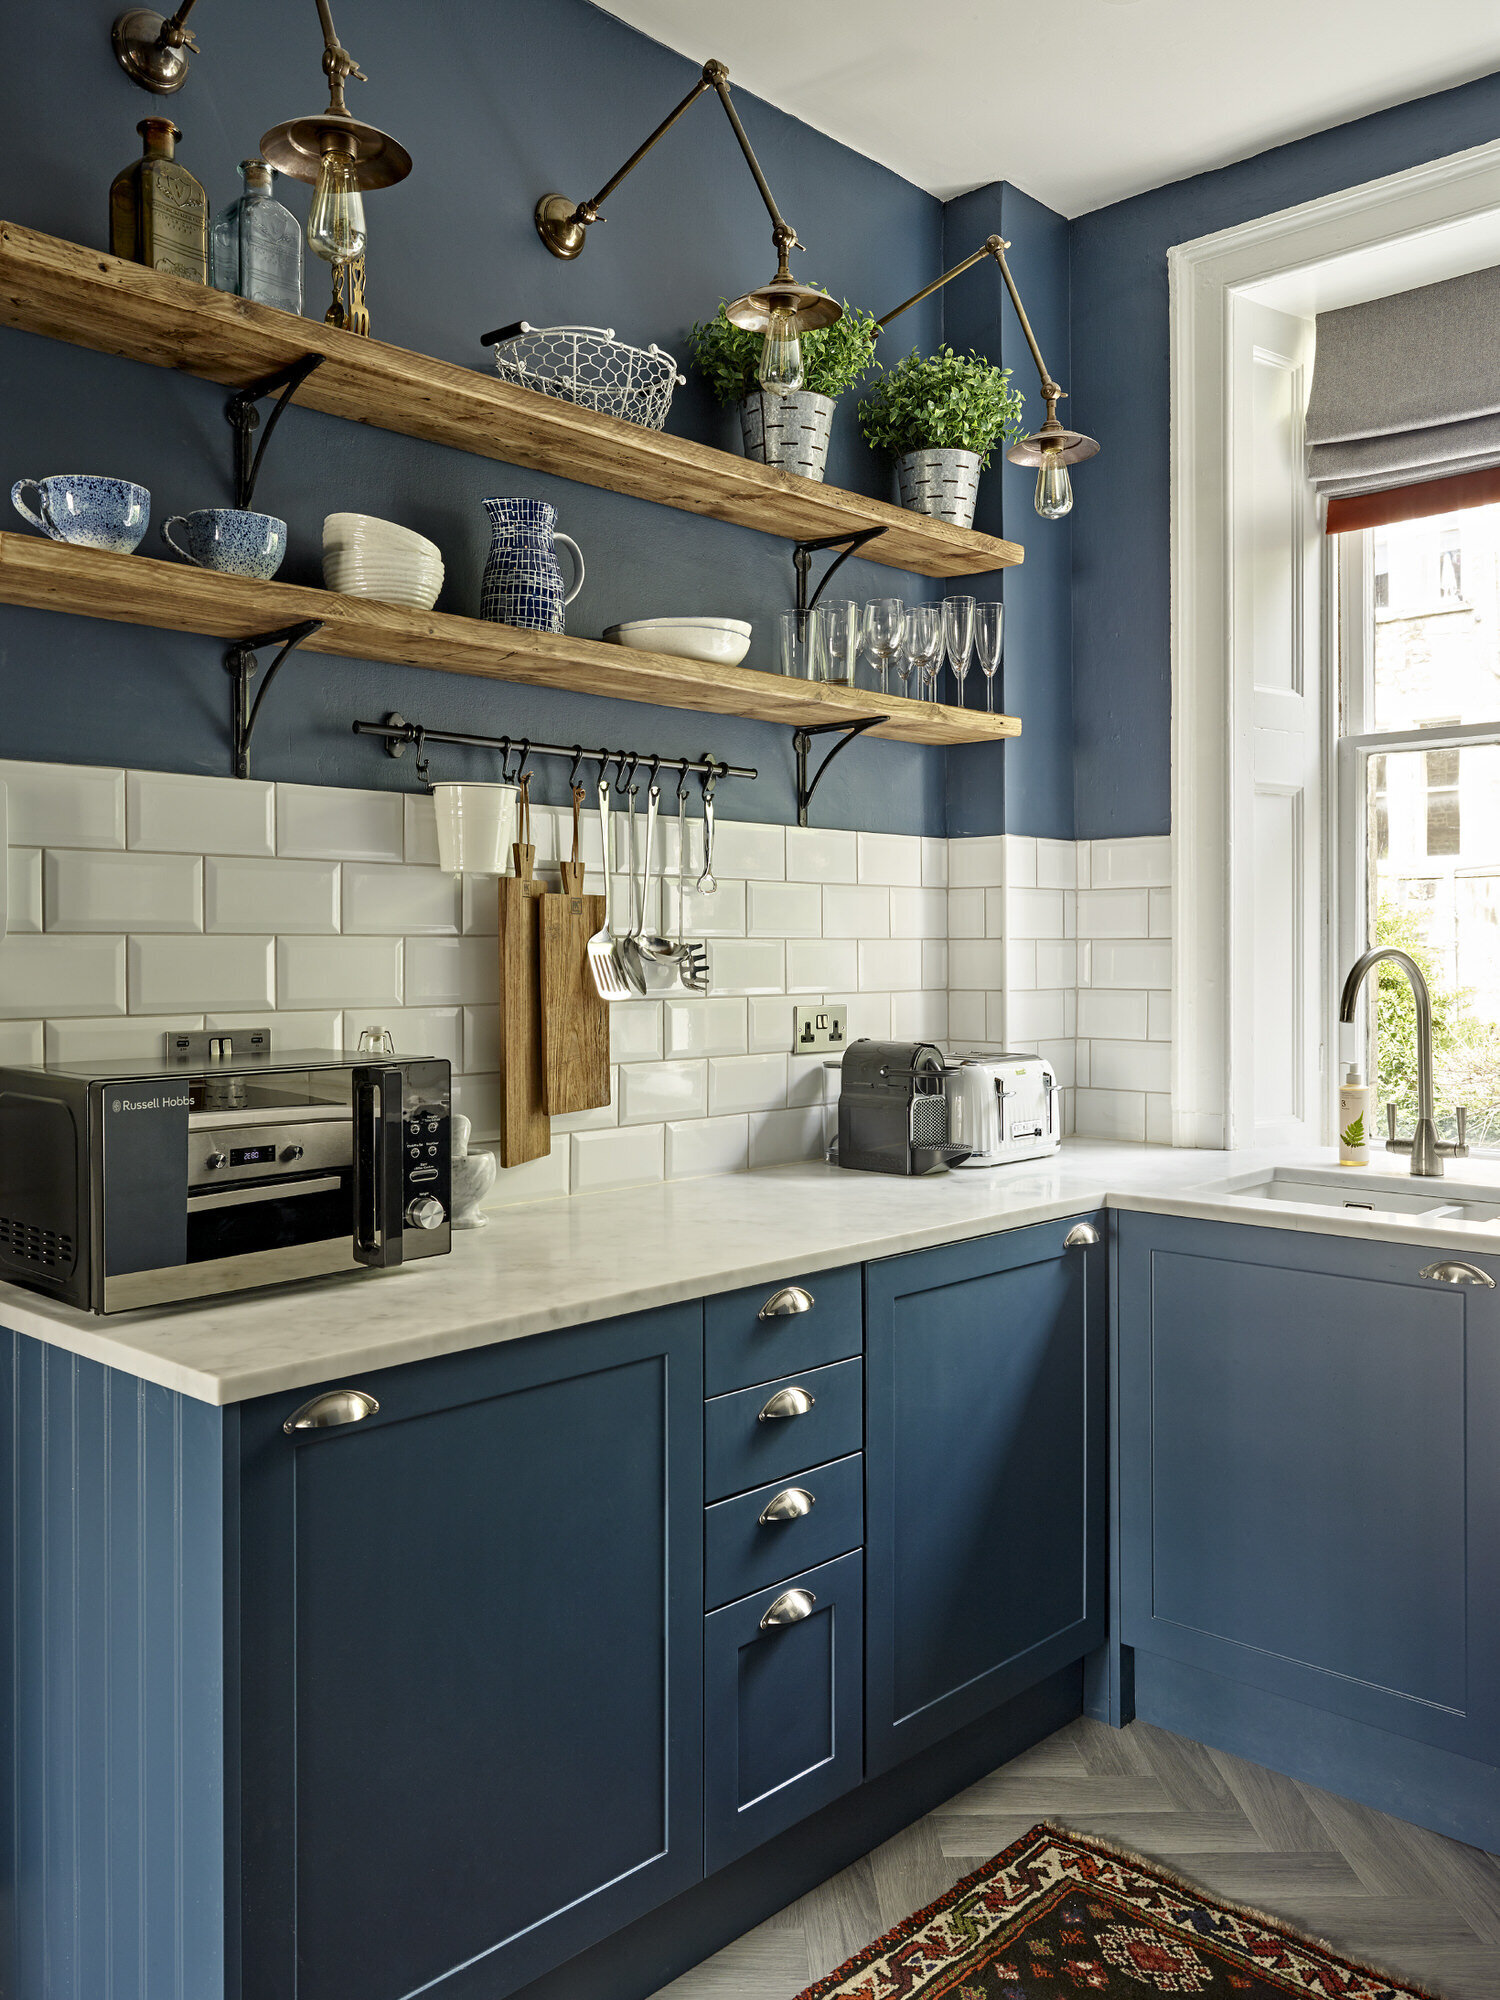 Navy kitchen interior cabinets and open wood shelving